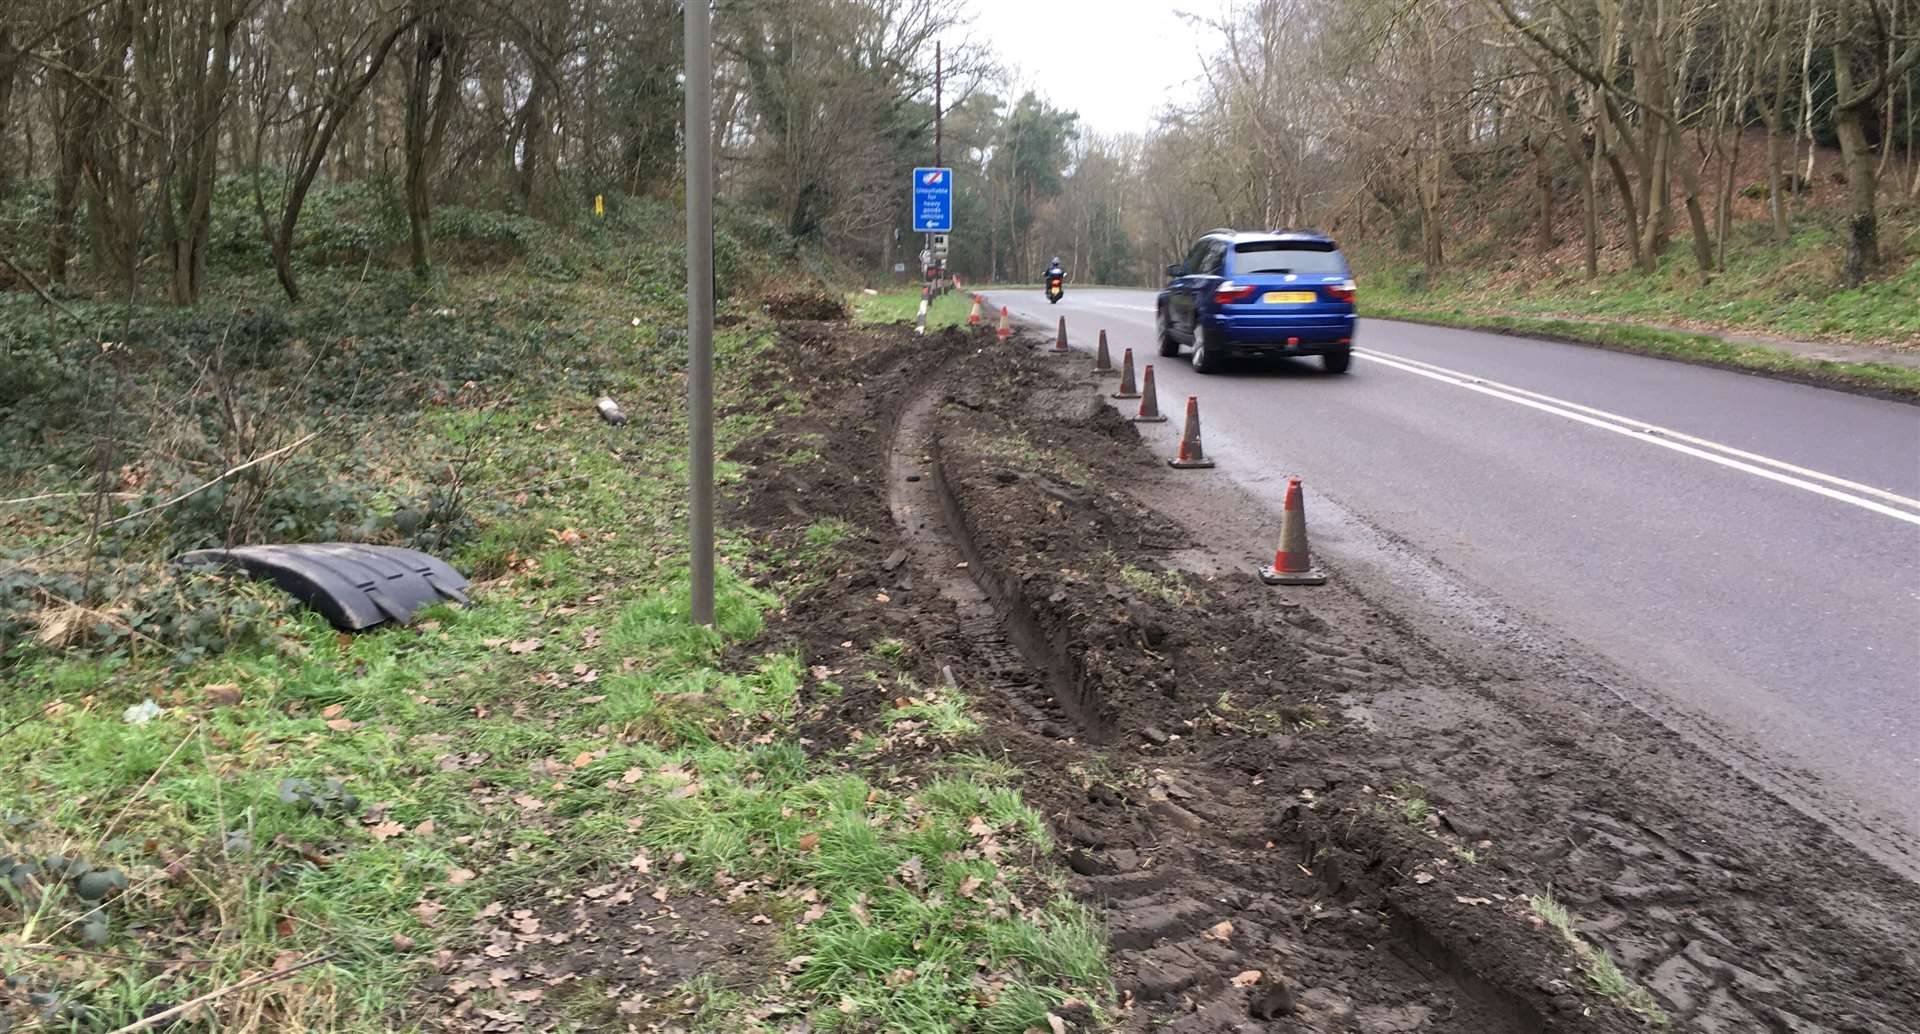 Verges have been damaged in 'near misses'. Picture: Cllr Catherine O'Meara